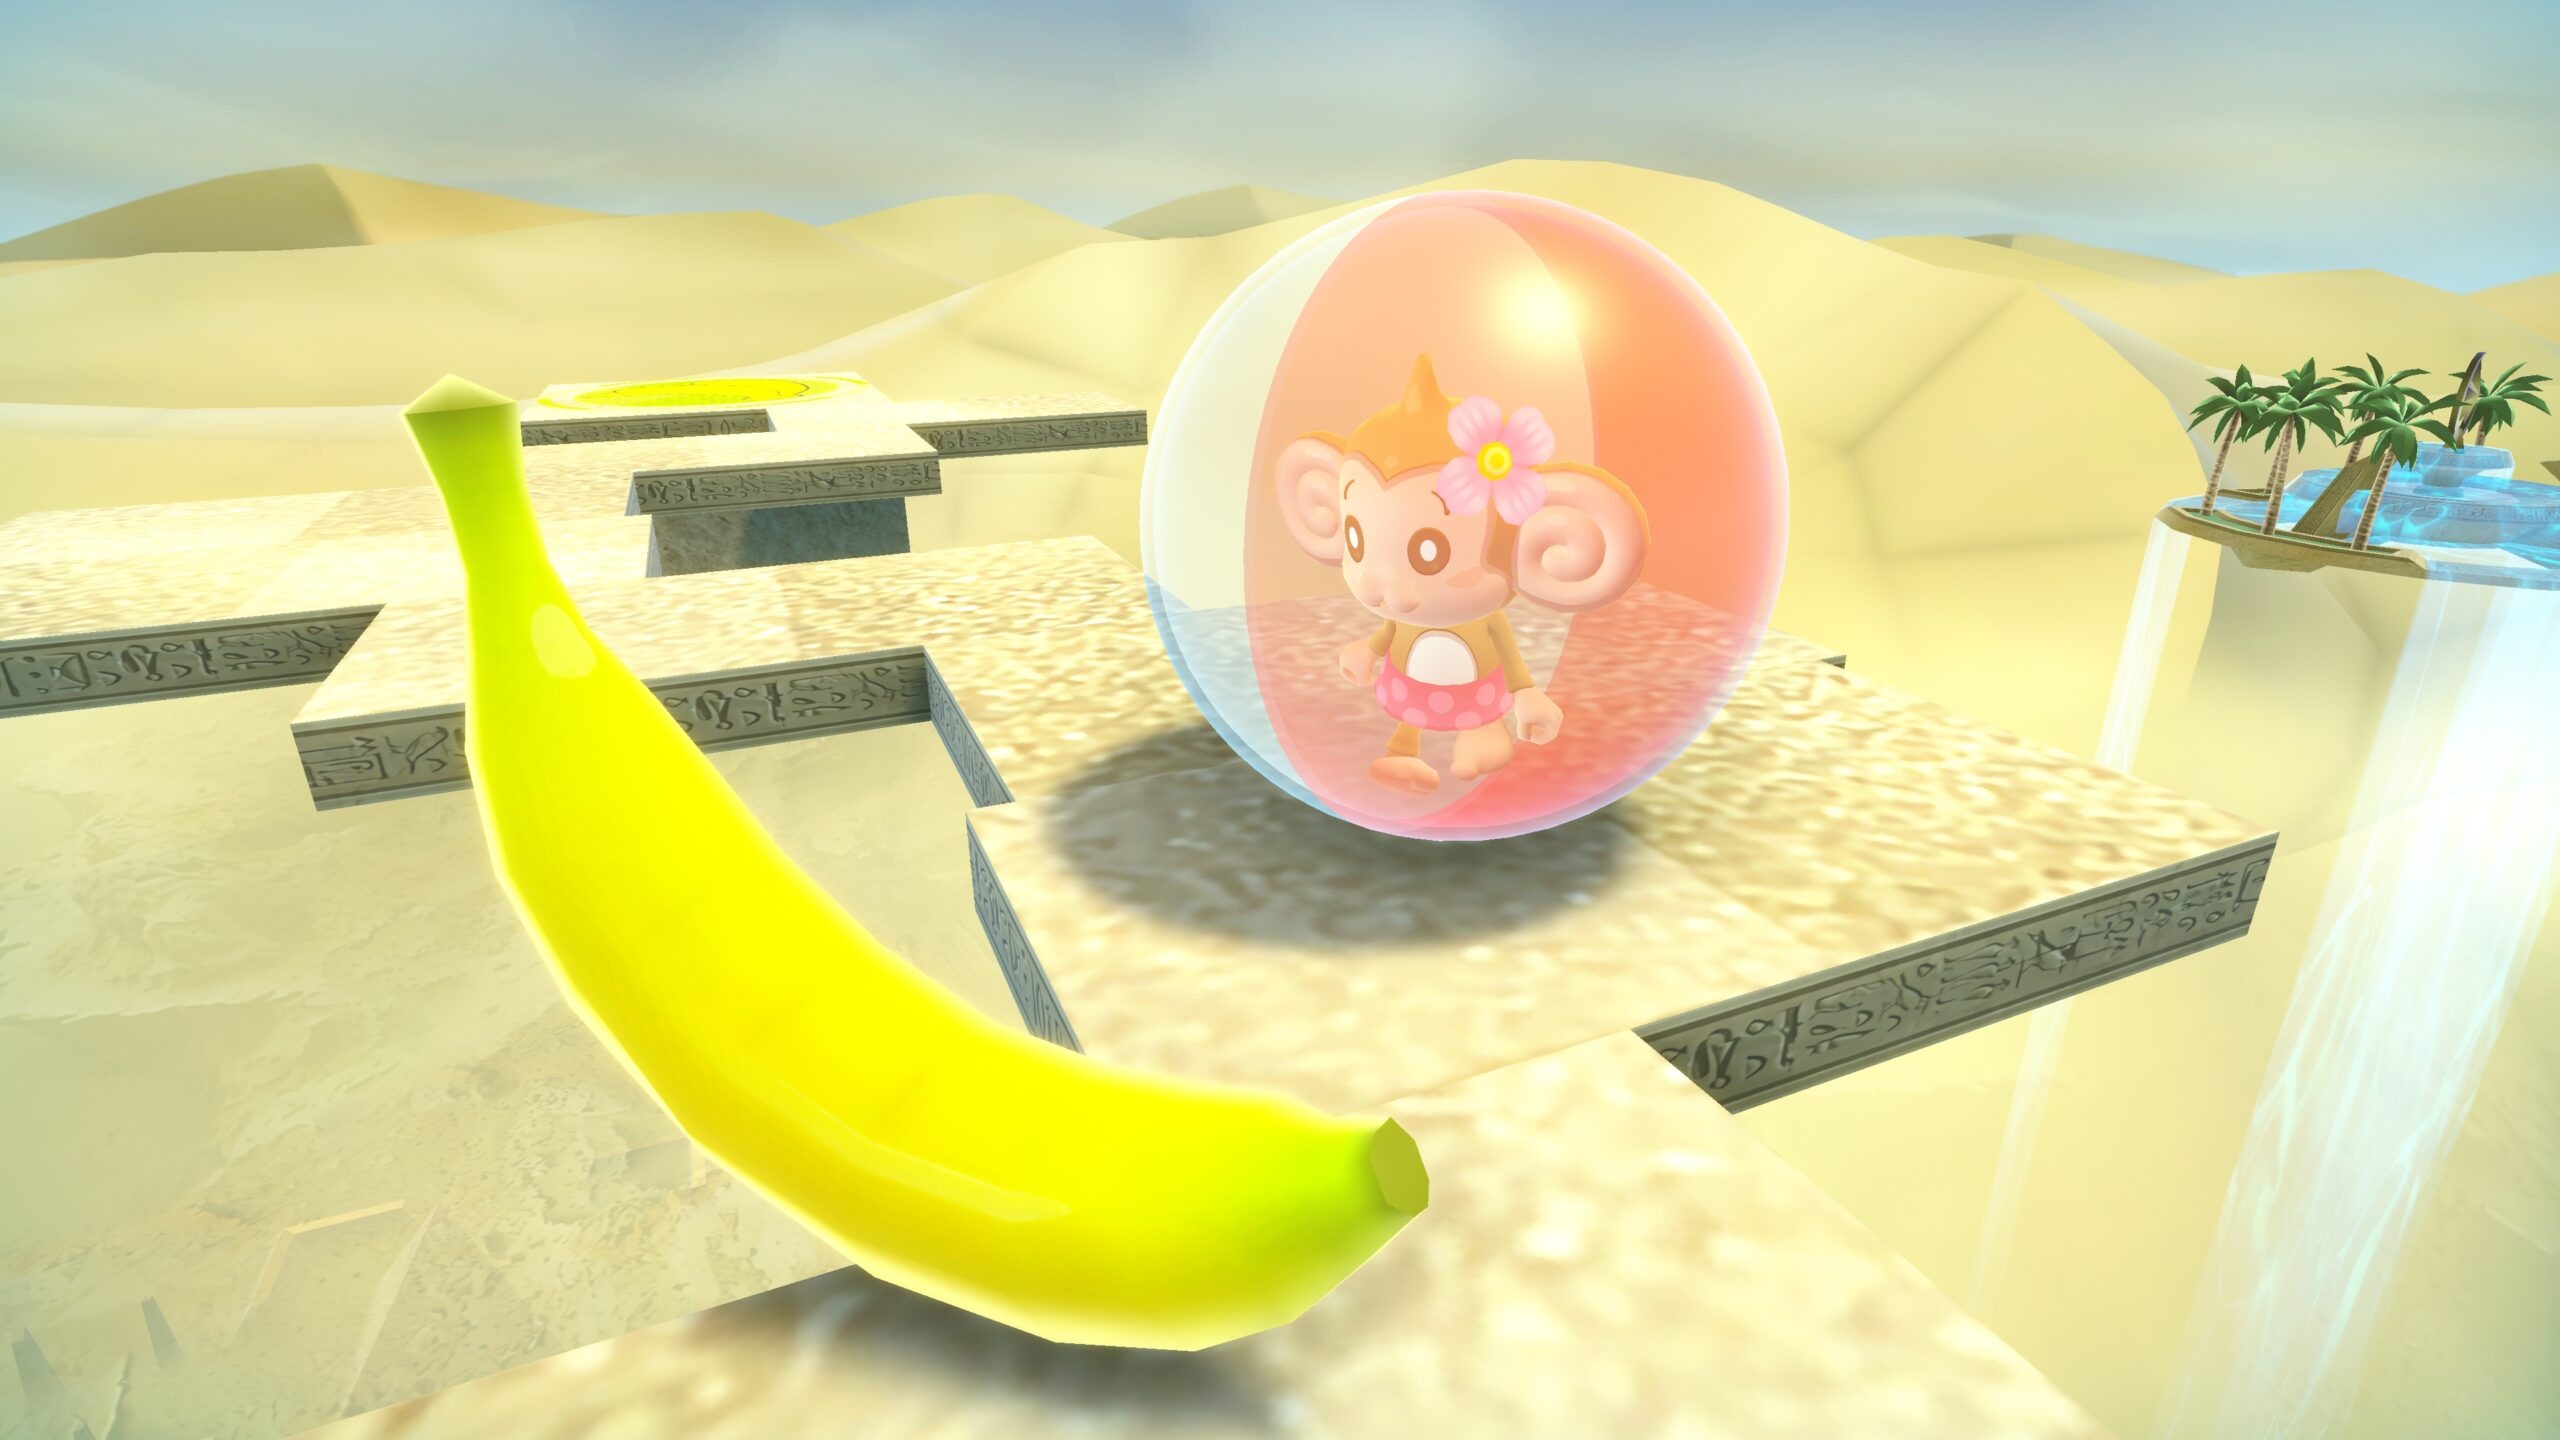 will super monkey ball banana mania have online multiplayer